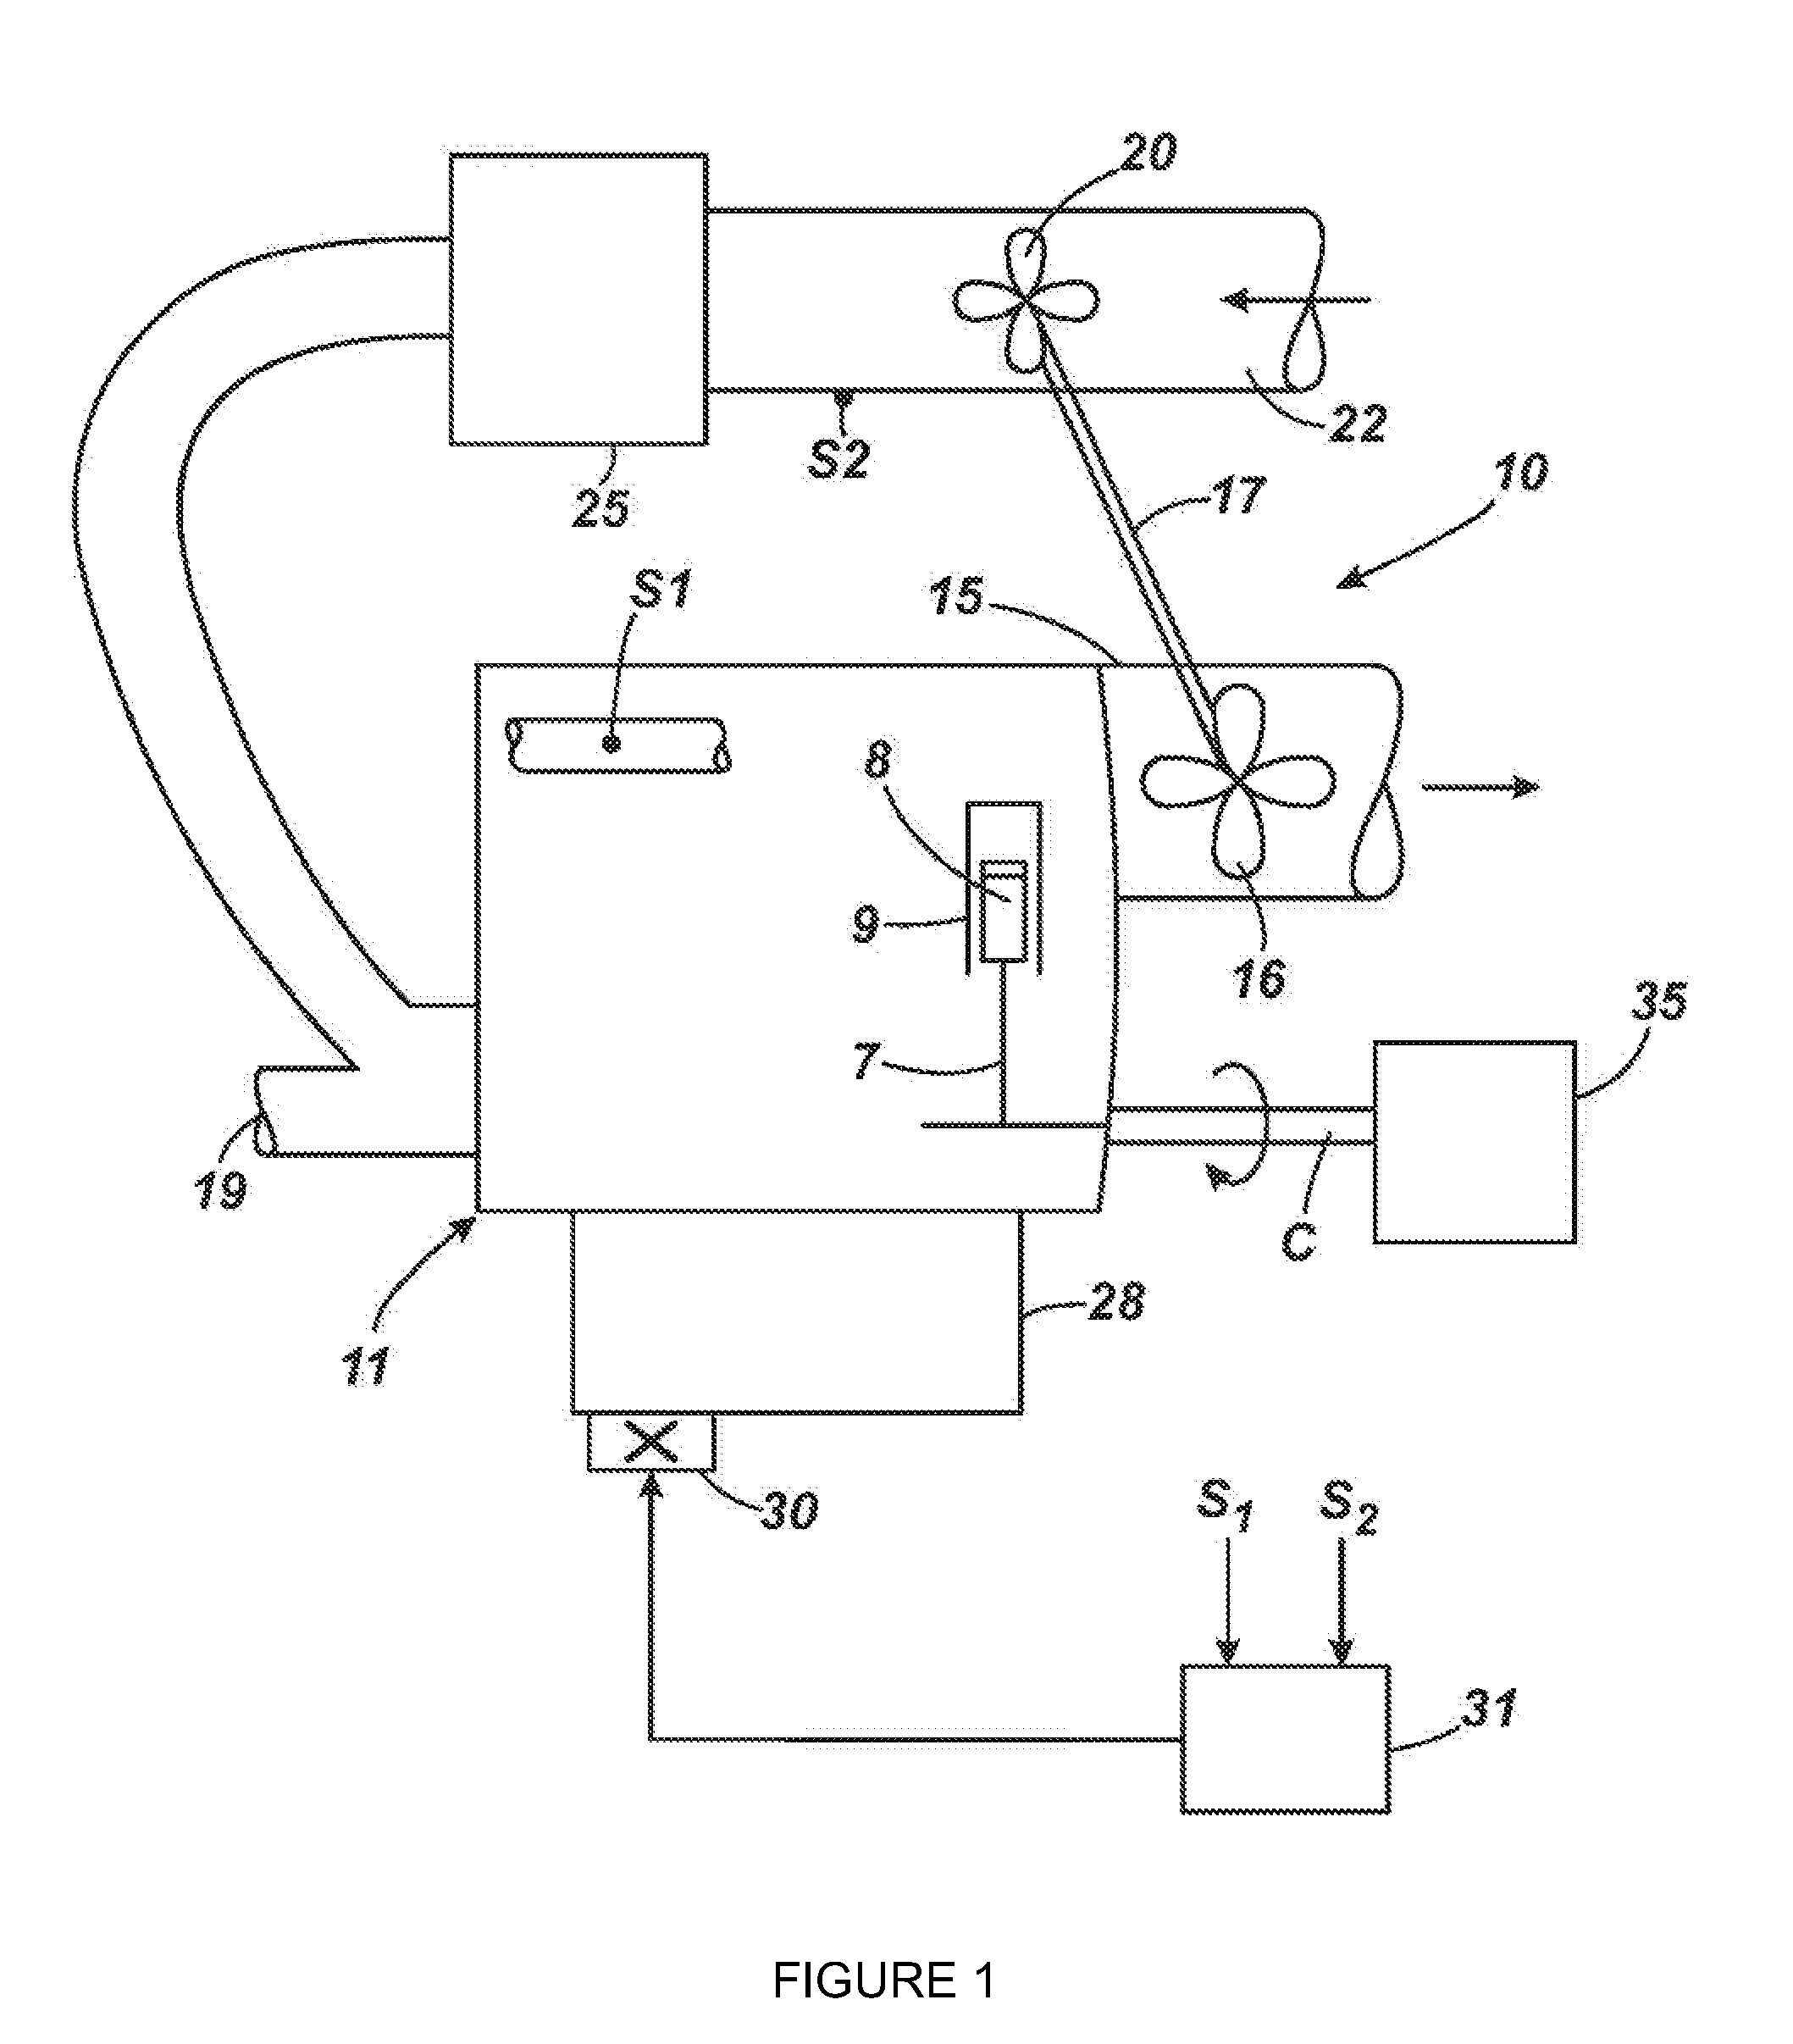 Method of operating a compression ignition engine